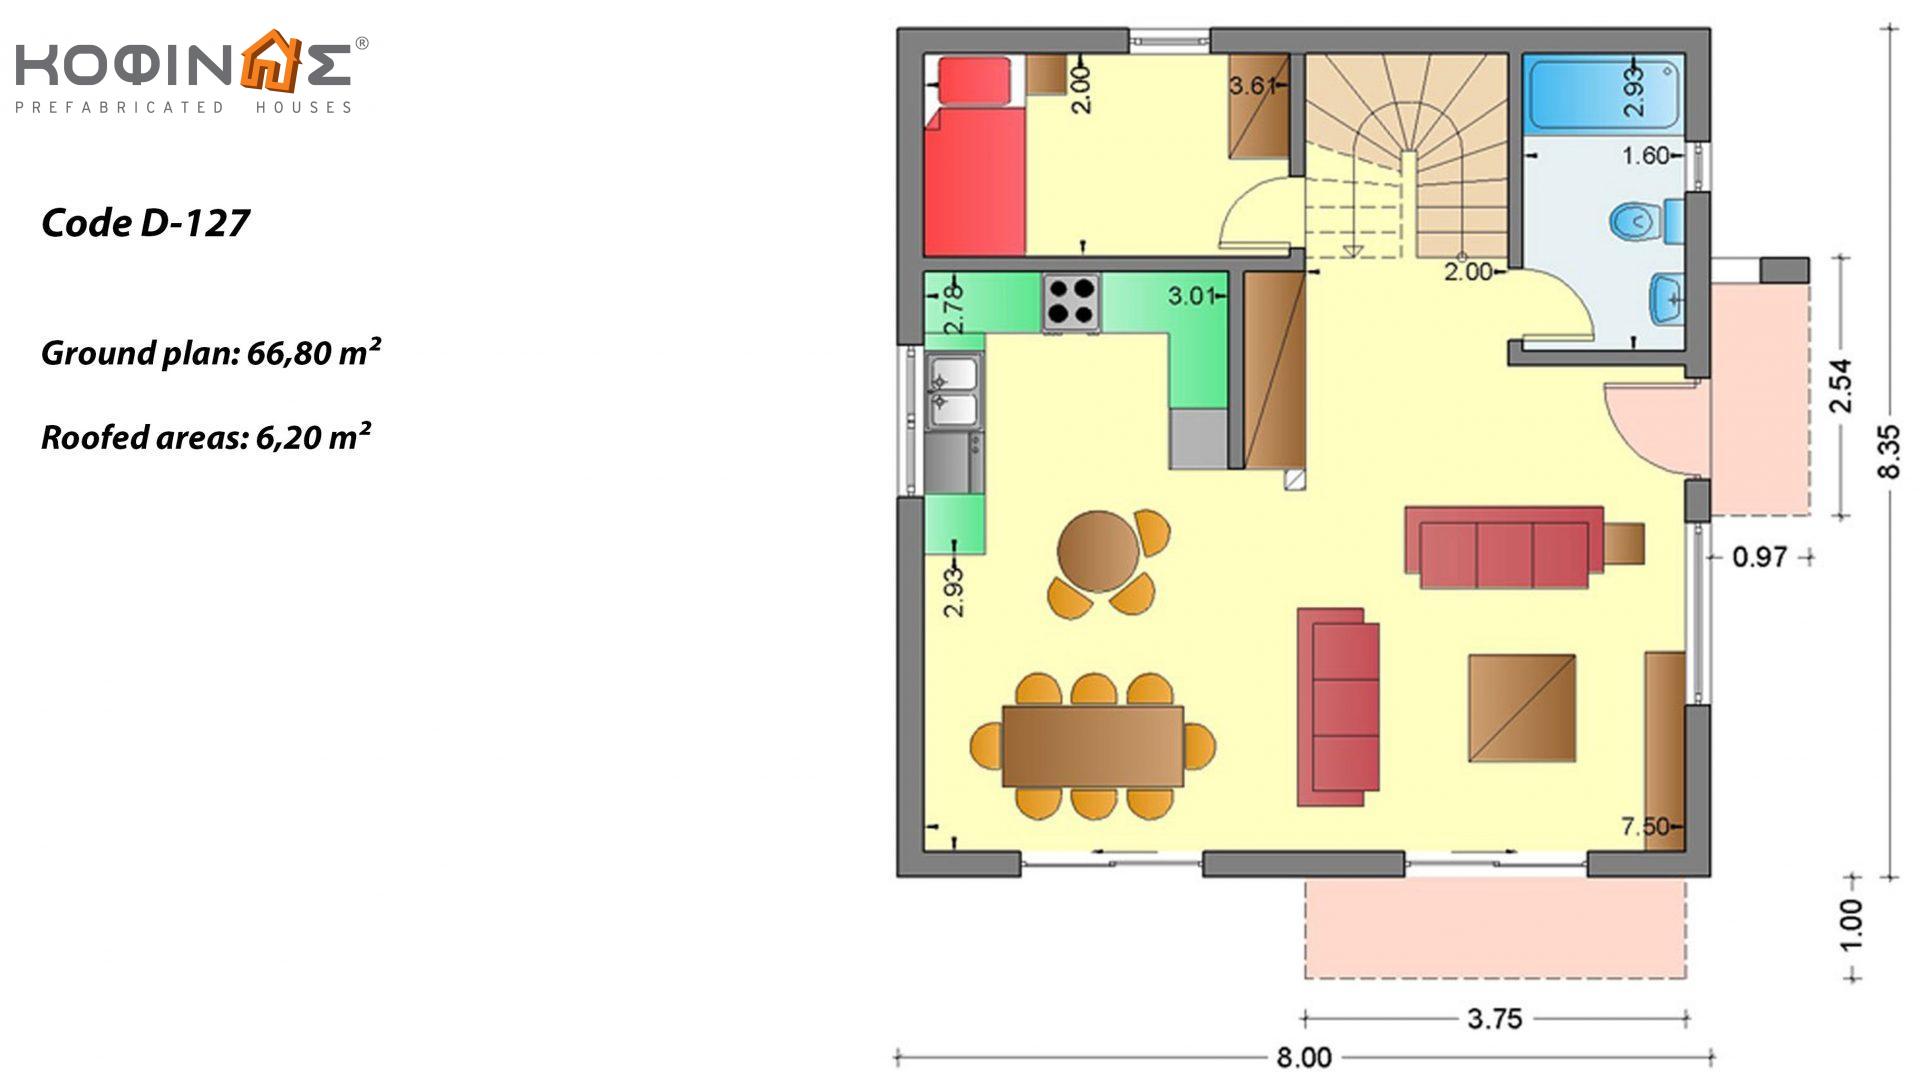 2-story house D-127, total surface of 127,00 m² ,covered roofed areas 12,86 m²,balconies 6,75 m²